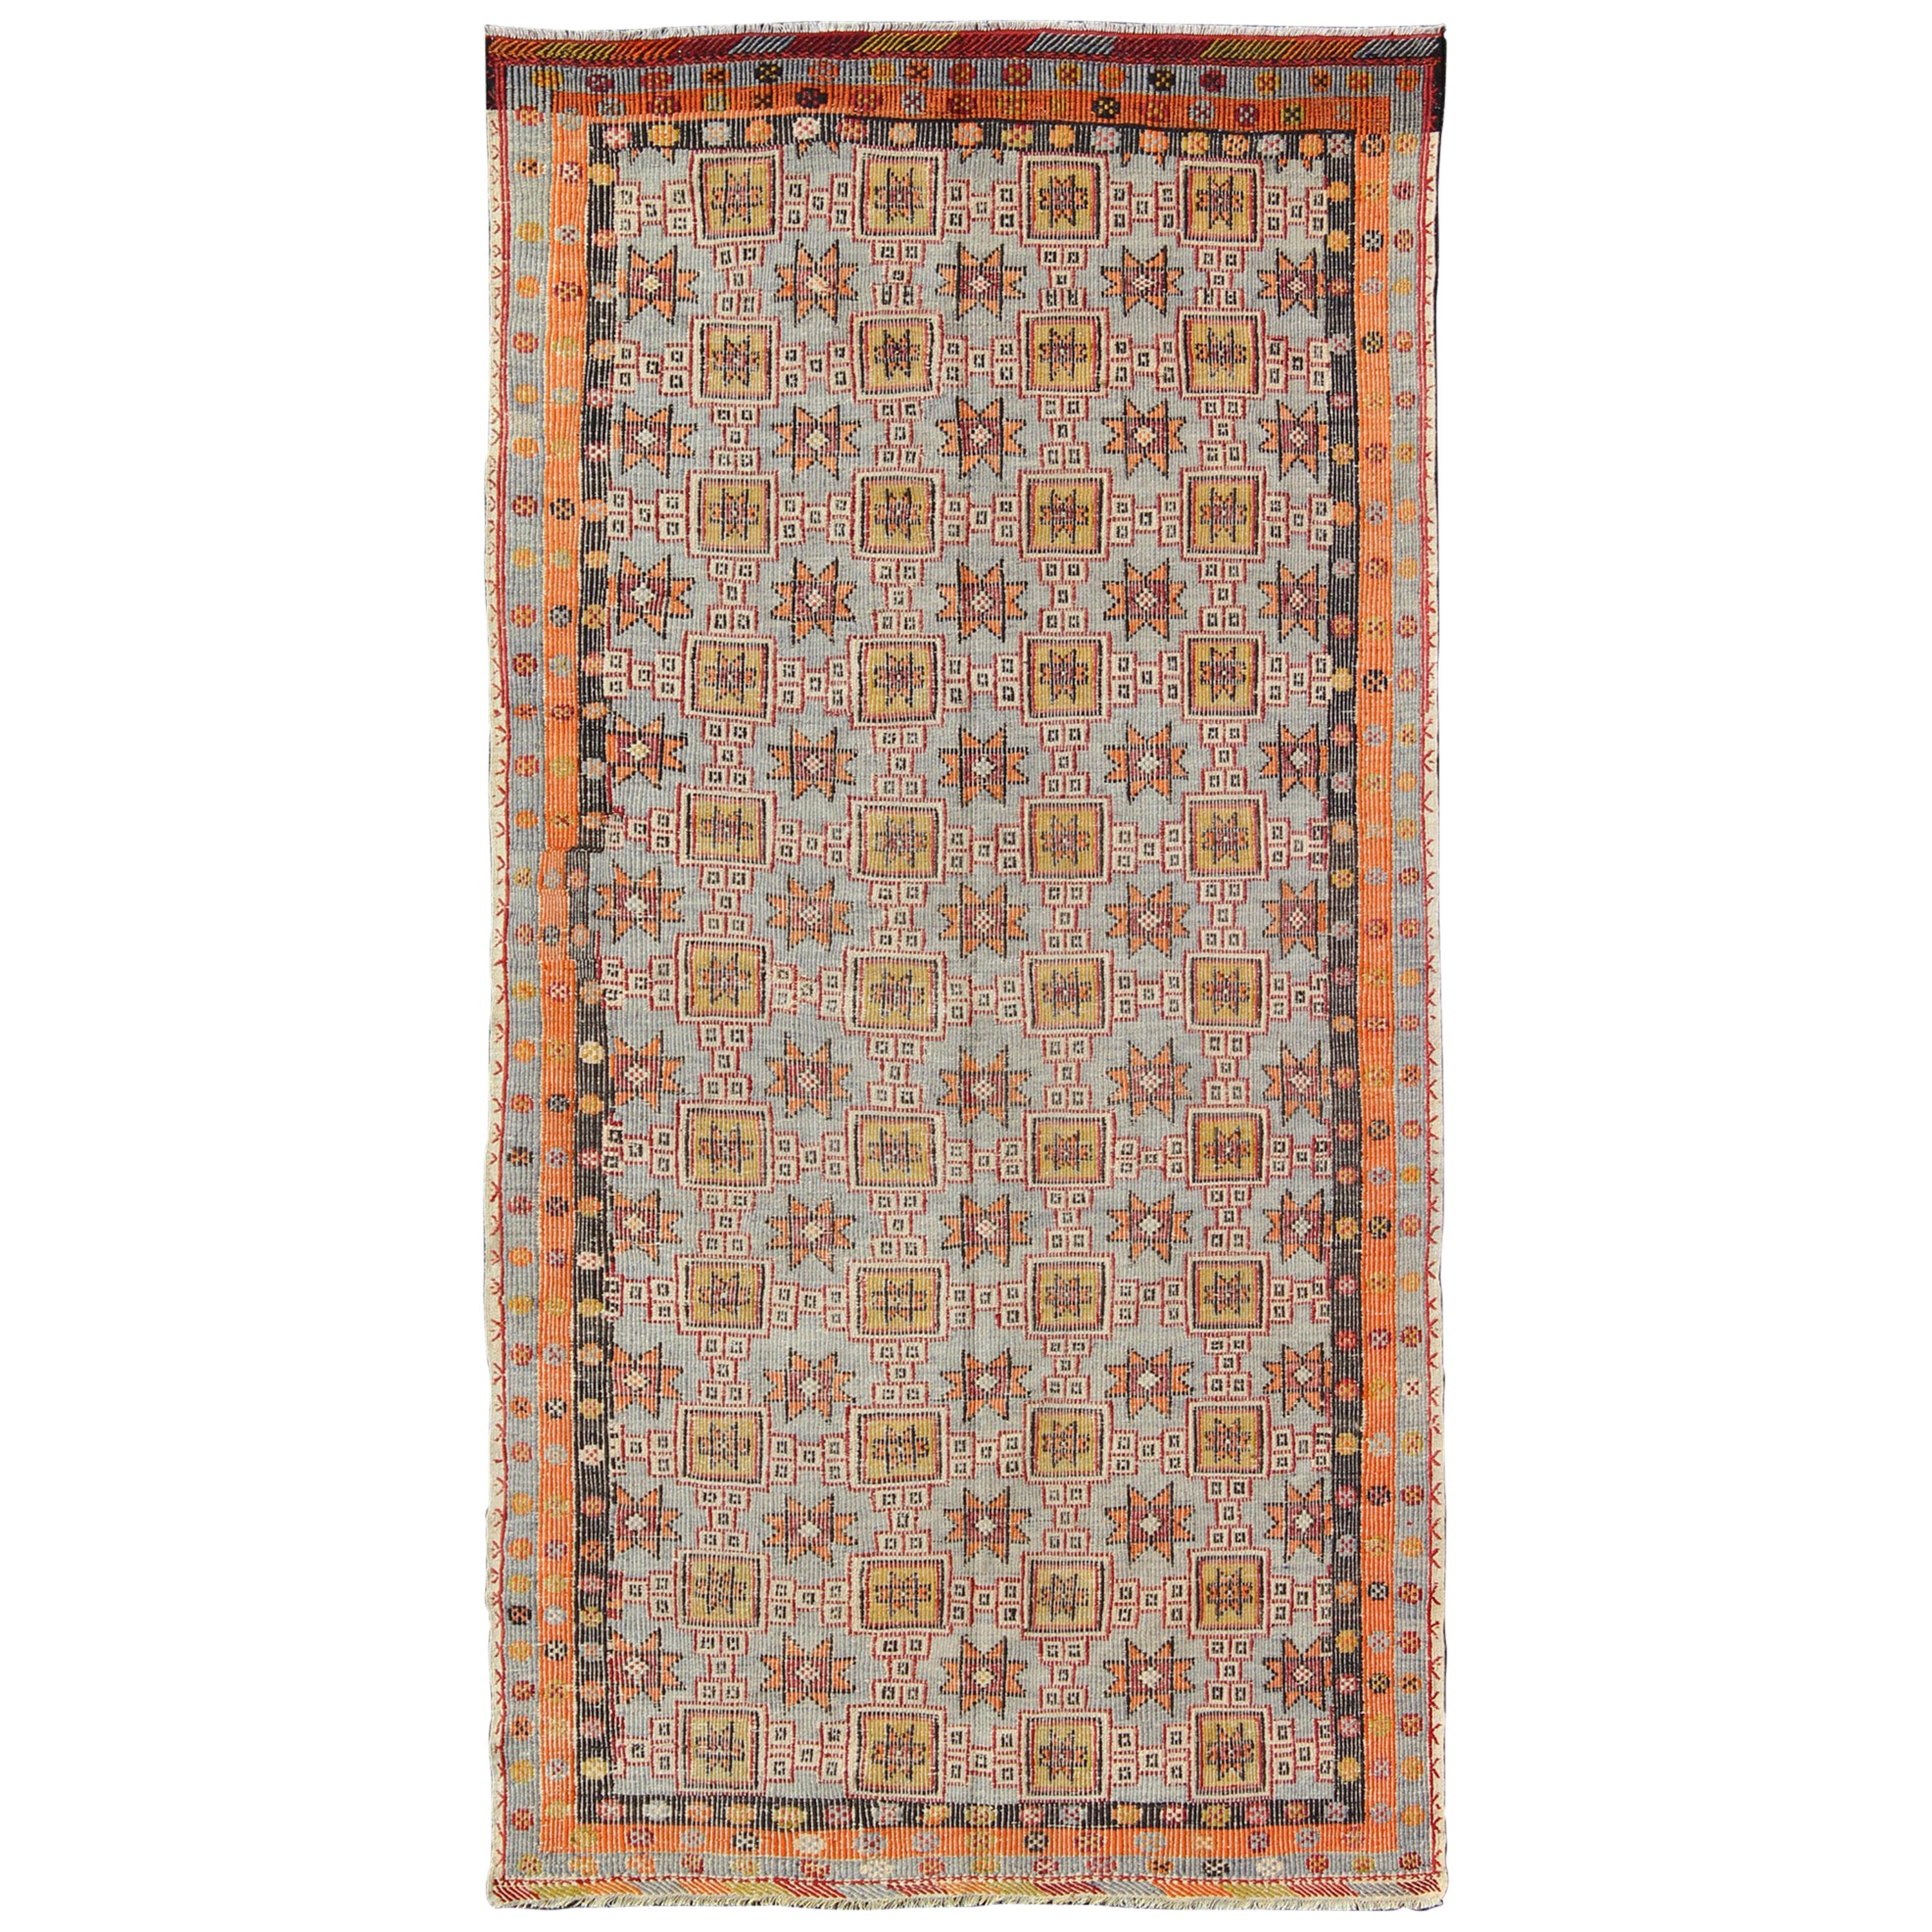 Long Vintage Embroidered Kilim Rug with Colorful All-Over Star Design